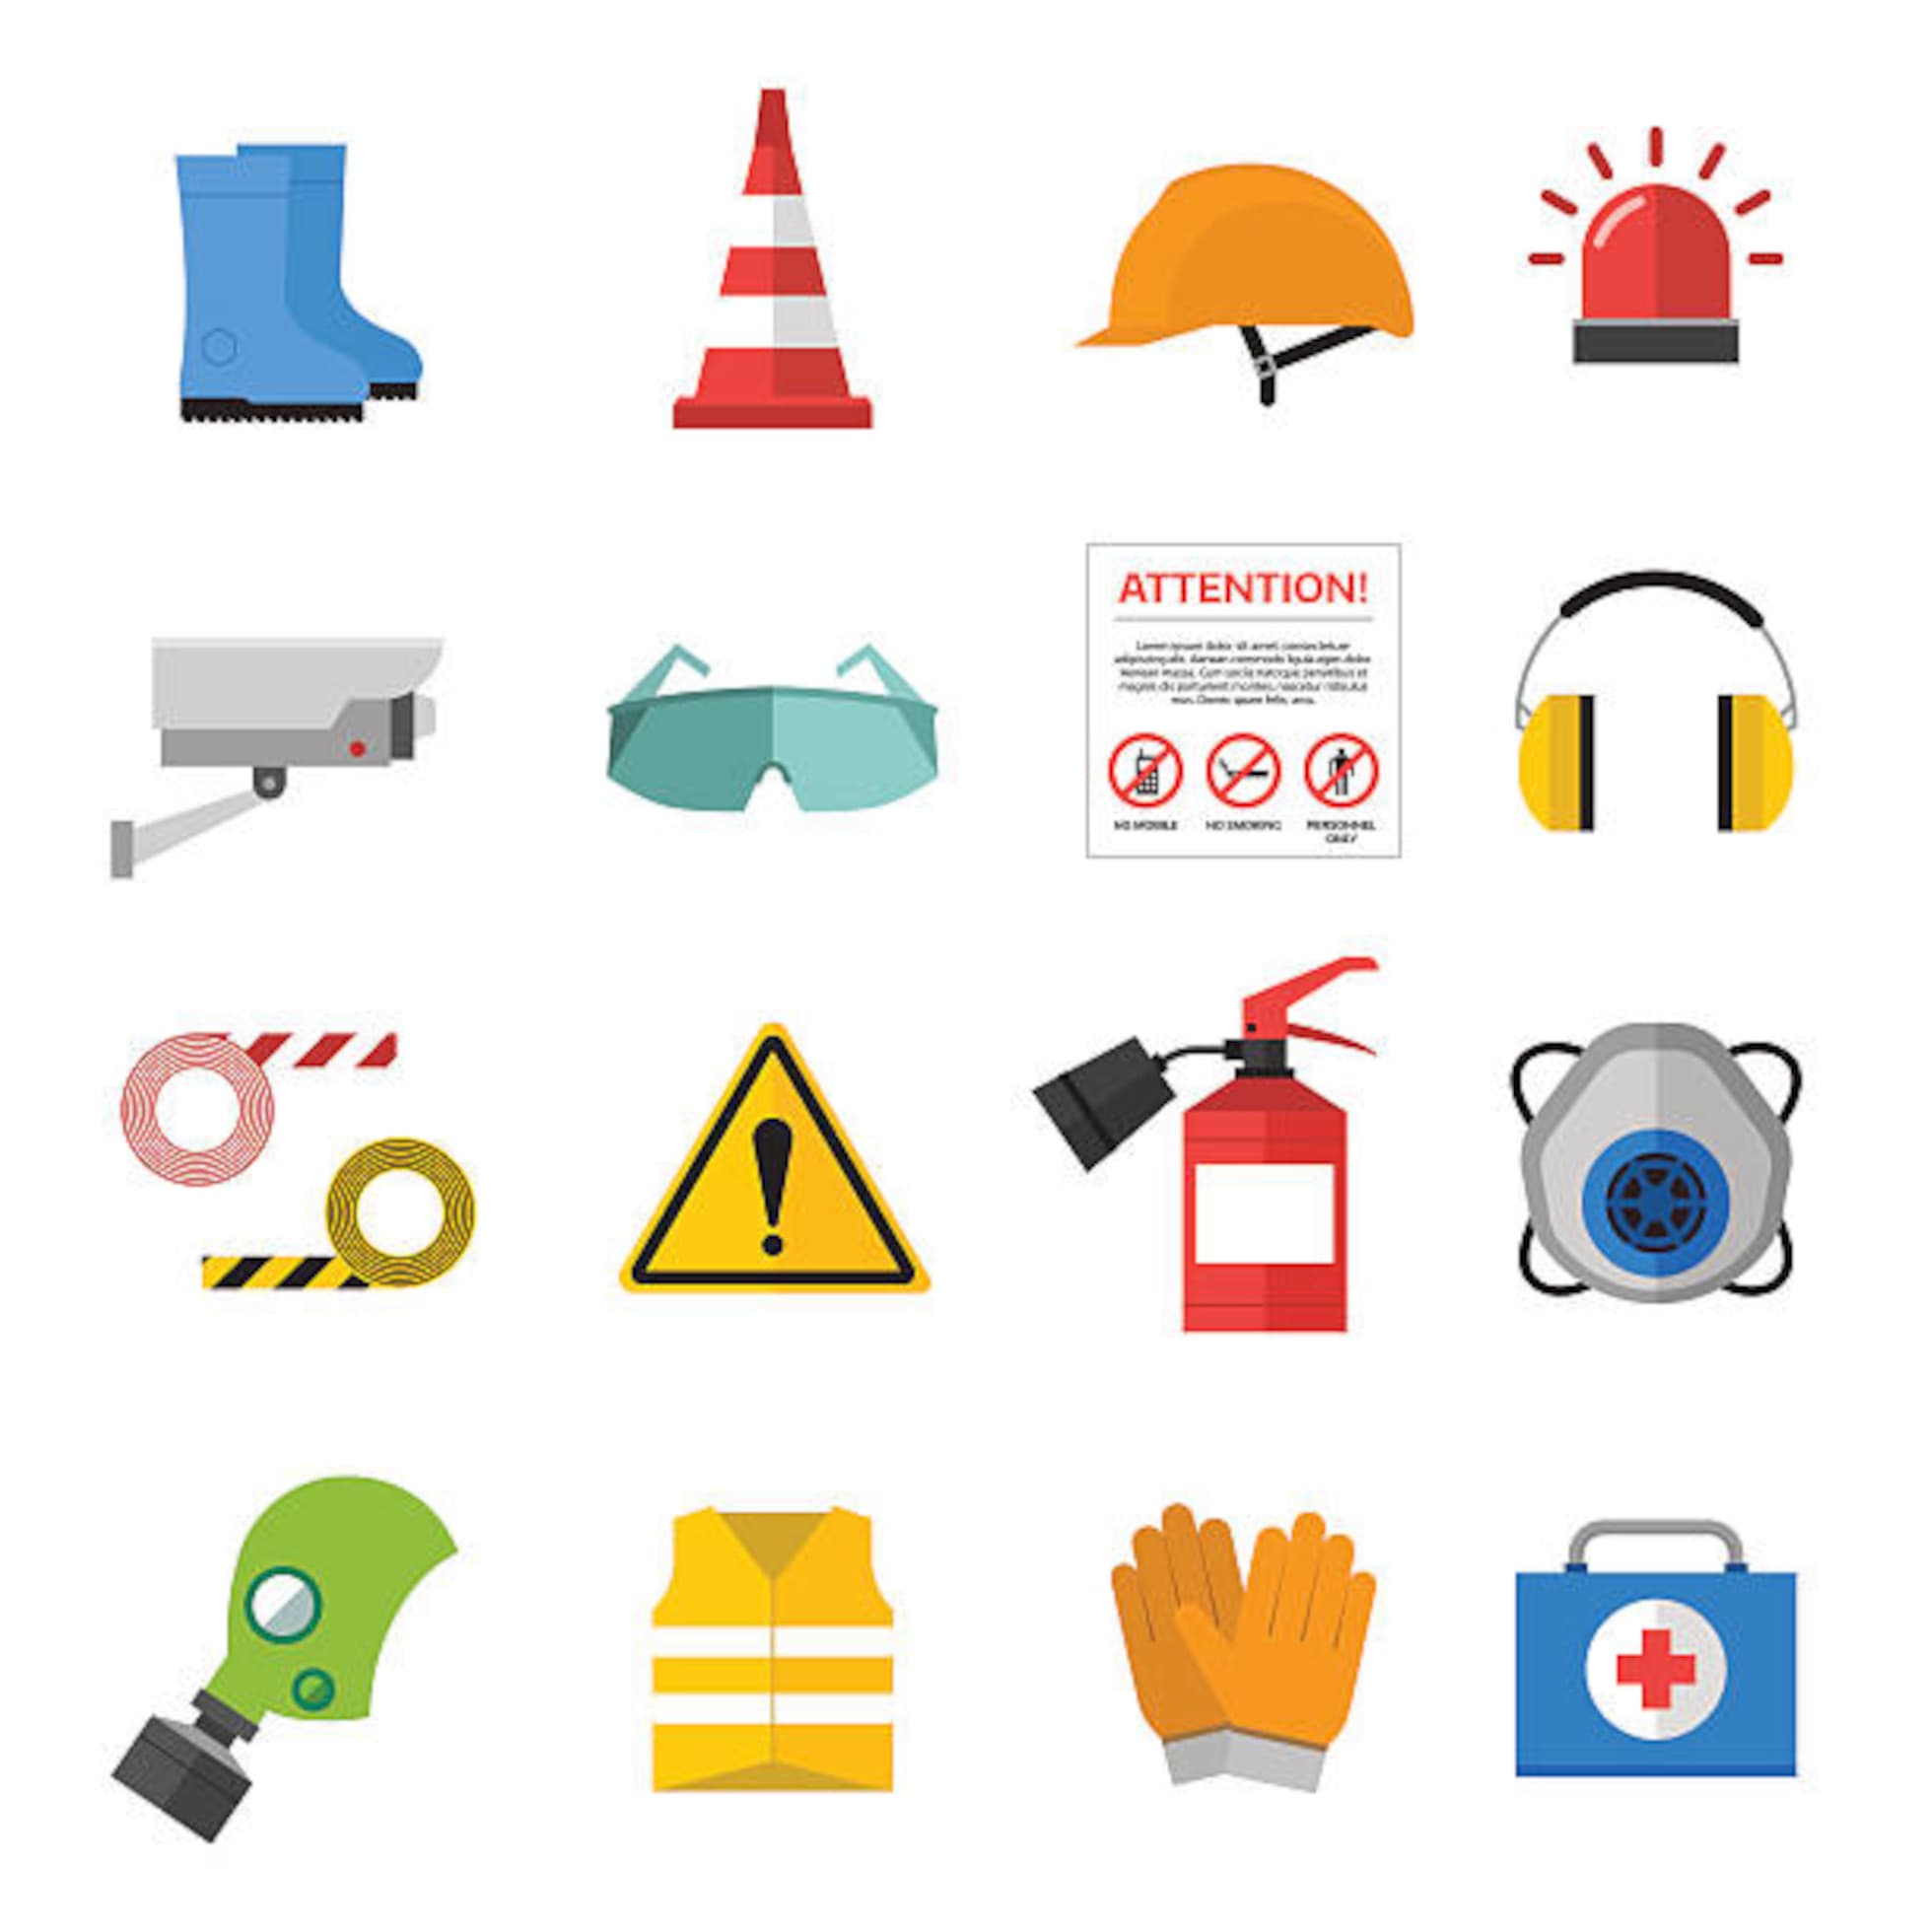 Safety supplies guide